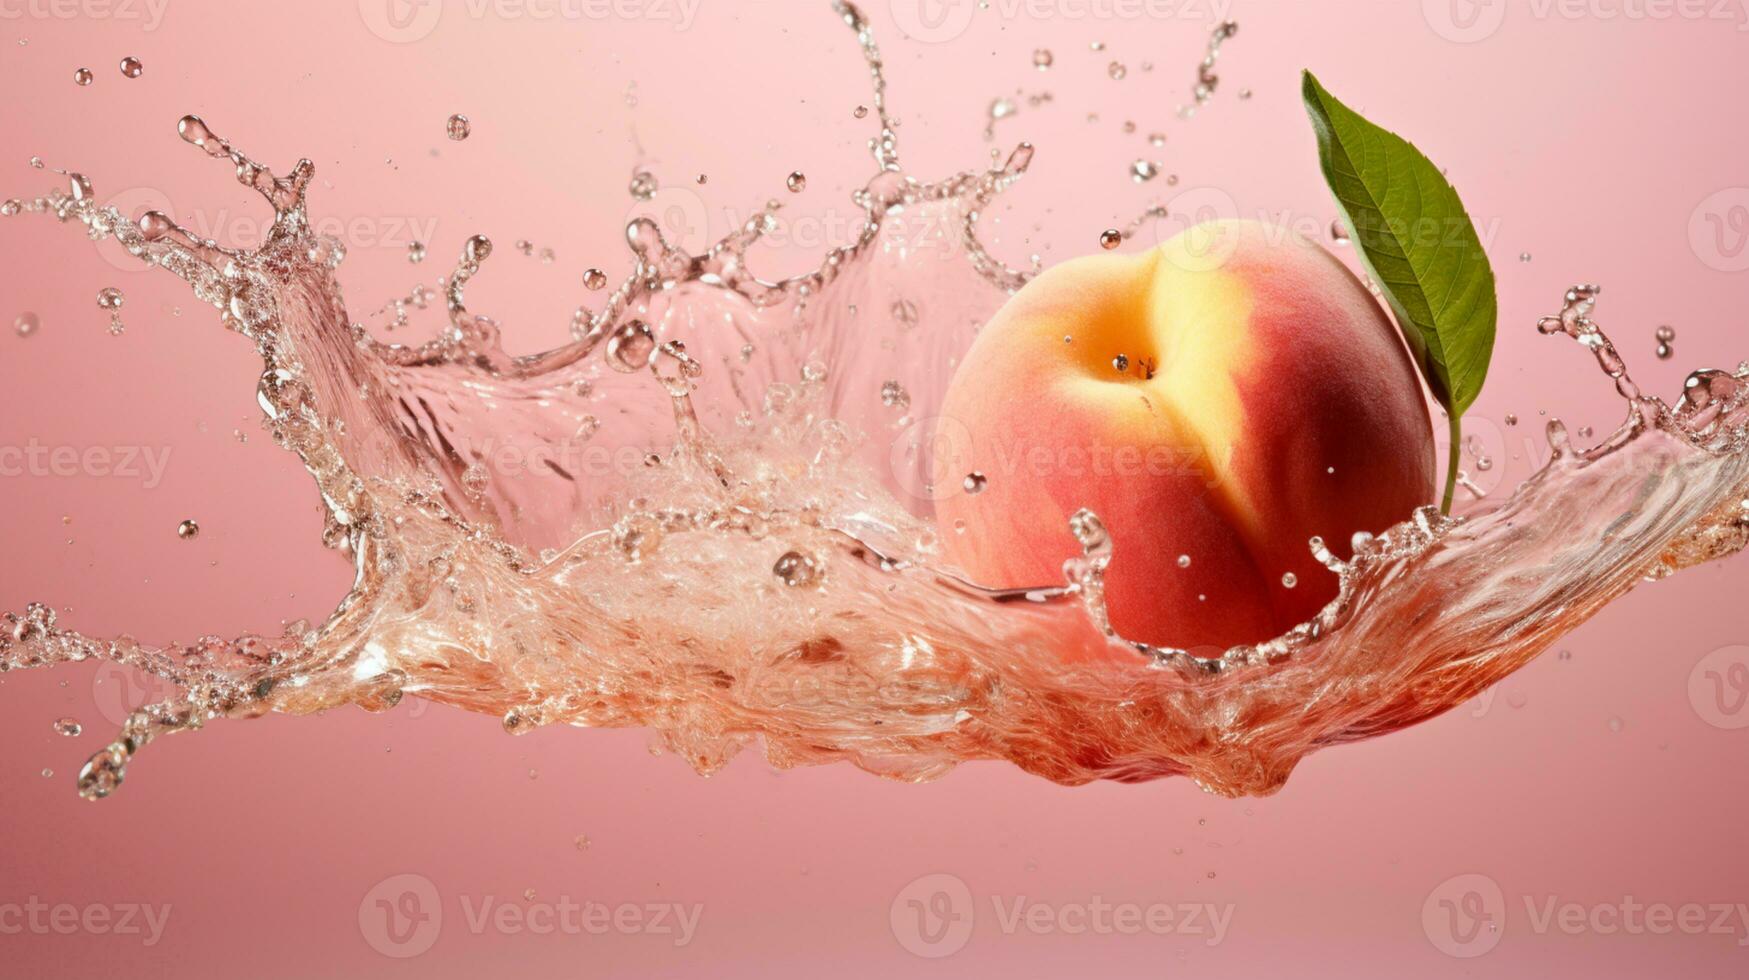 Fresh juicy peach fruit with water splash isolated on background, healthy fruit photo